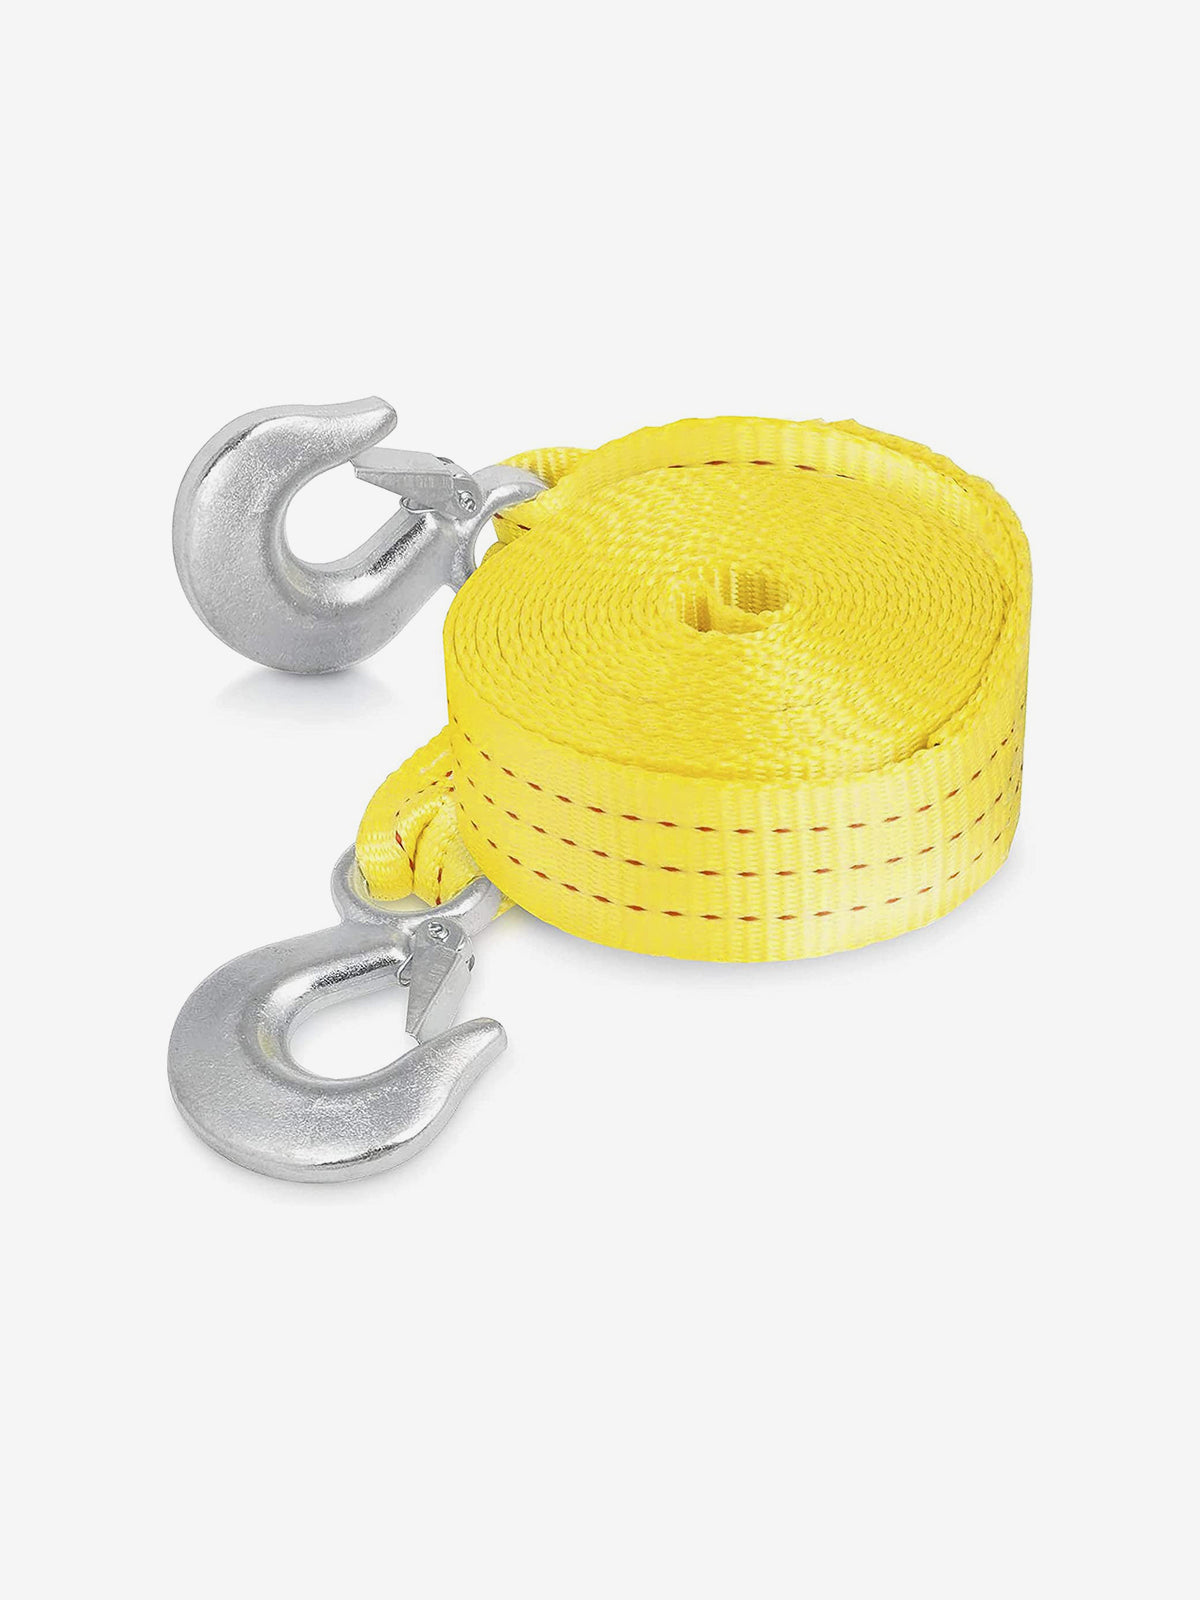 Tow Strap with Safety Hooks - 10000LBS